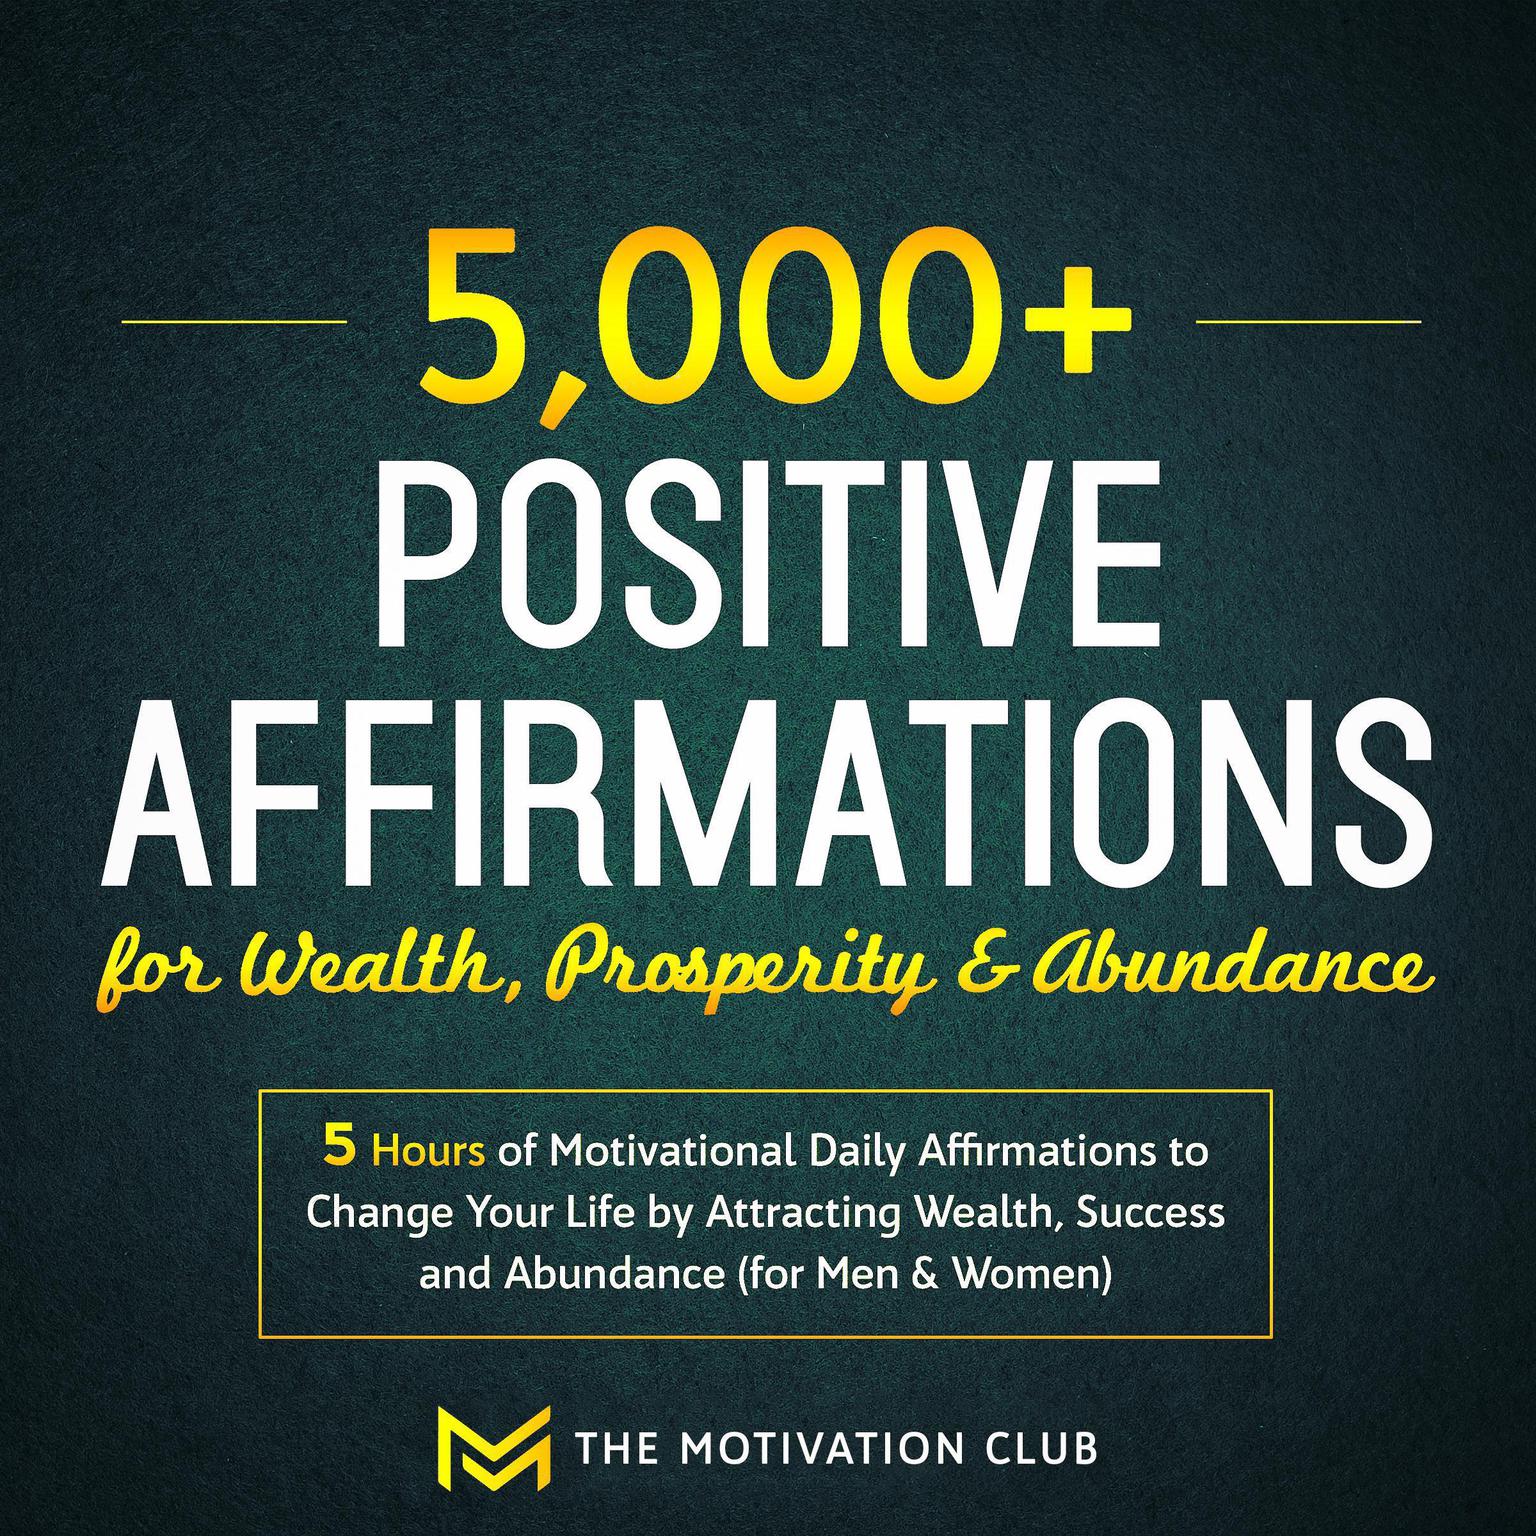 5,000+ Positive Affirmations for Wealth, Prosperity, and Abundance: 5 Hours of Motivational Daily Affirmations to Change Your Life by Attracting Wealth, Success and Abundance (for Men & Women) Audiobook, by The Motivation Club